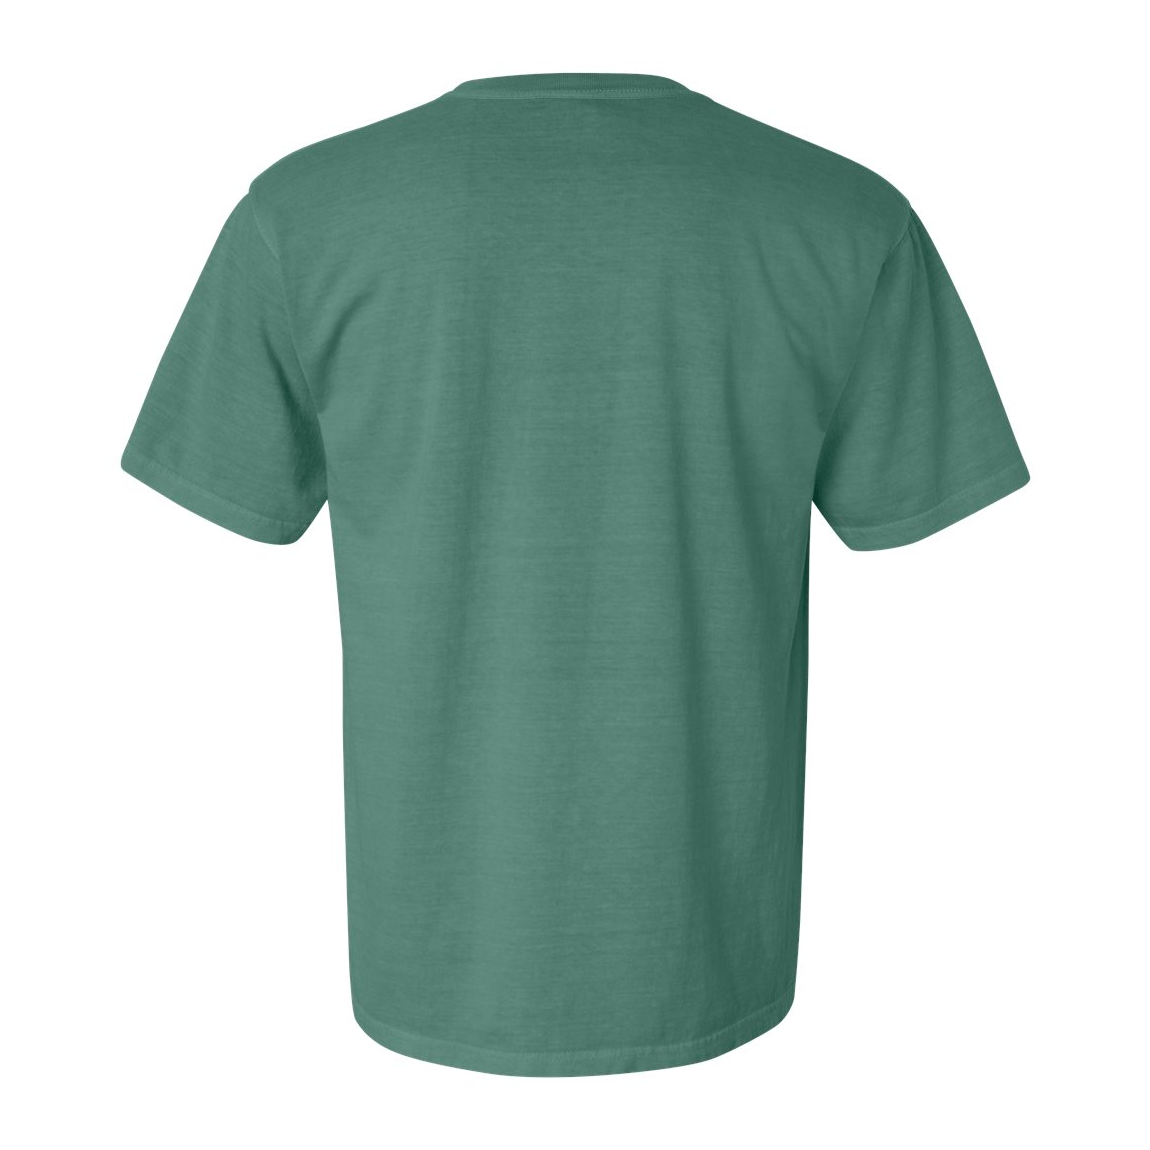 Rugby Imports Ireland Rugby Logo T-Shirt - Green